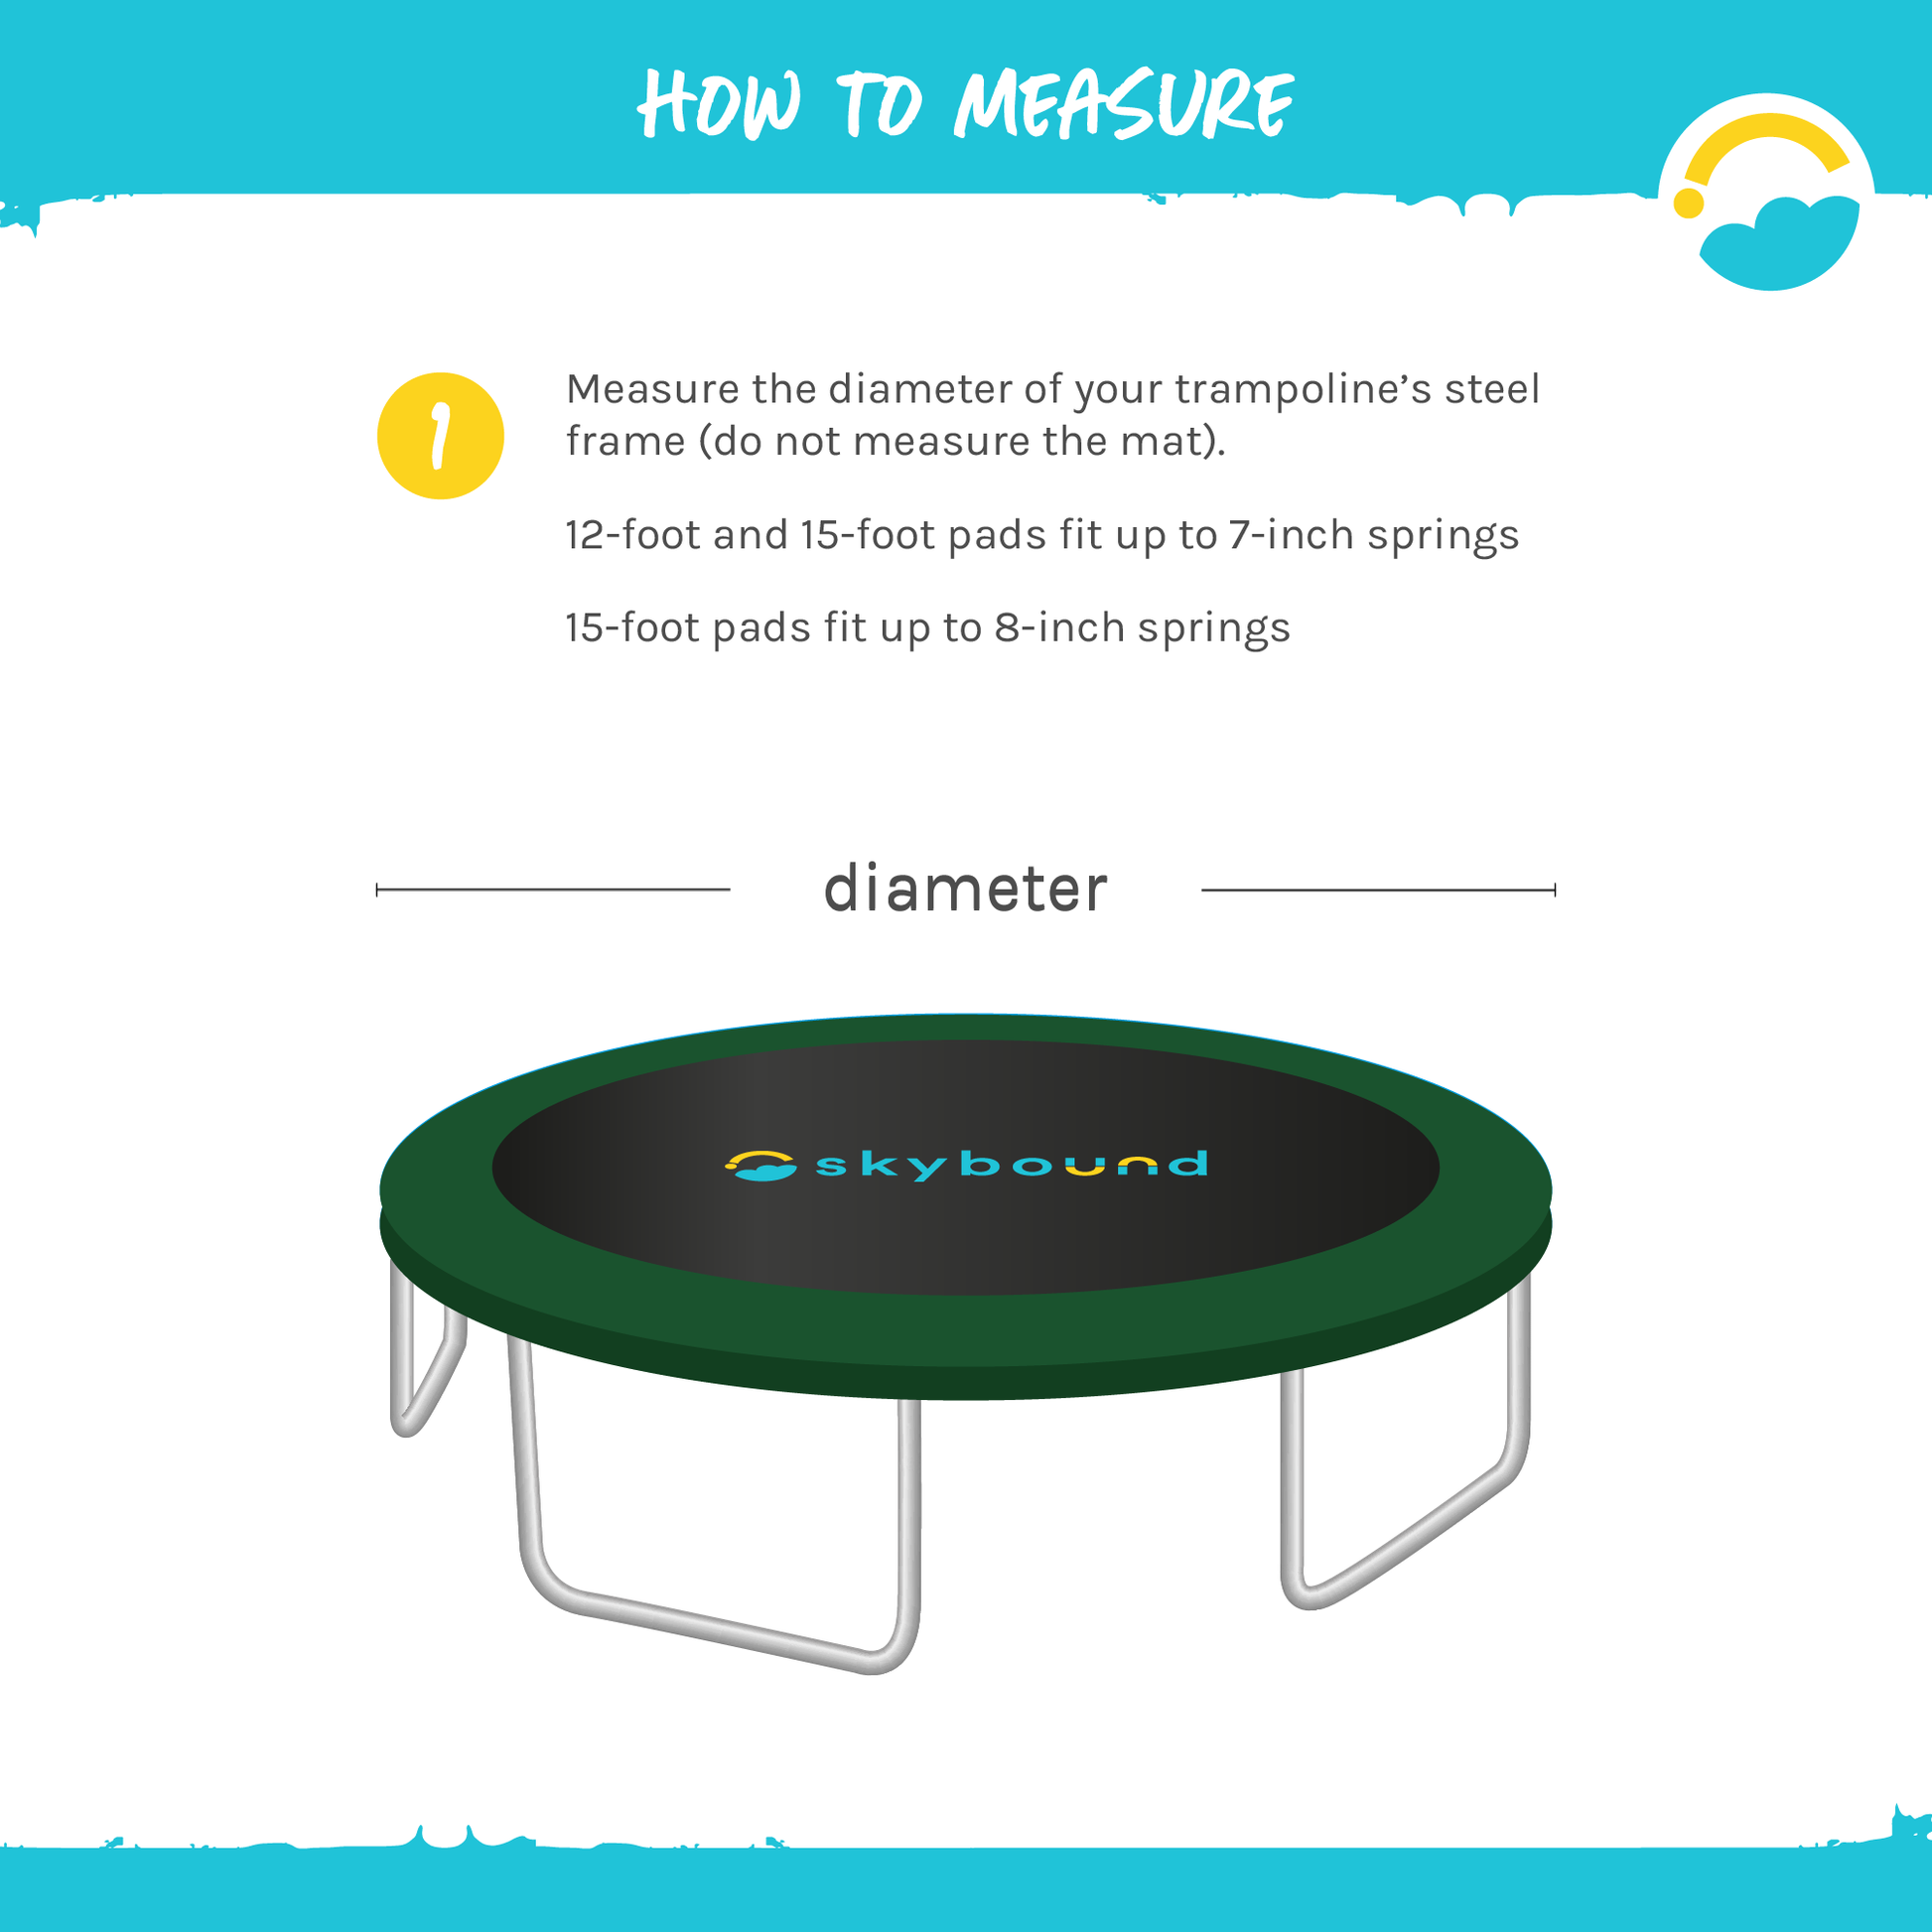 How to Measure:  1-Measure the diameter of your trampoline's steel frame (do not measure the mat).  12-foot and 15-foot pads fit up to 7 inch springs.  15-foot pads fit up to 8-inch springs.  